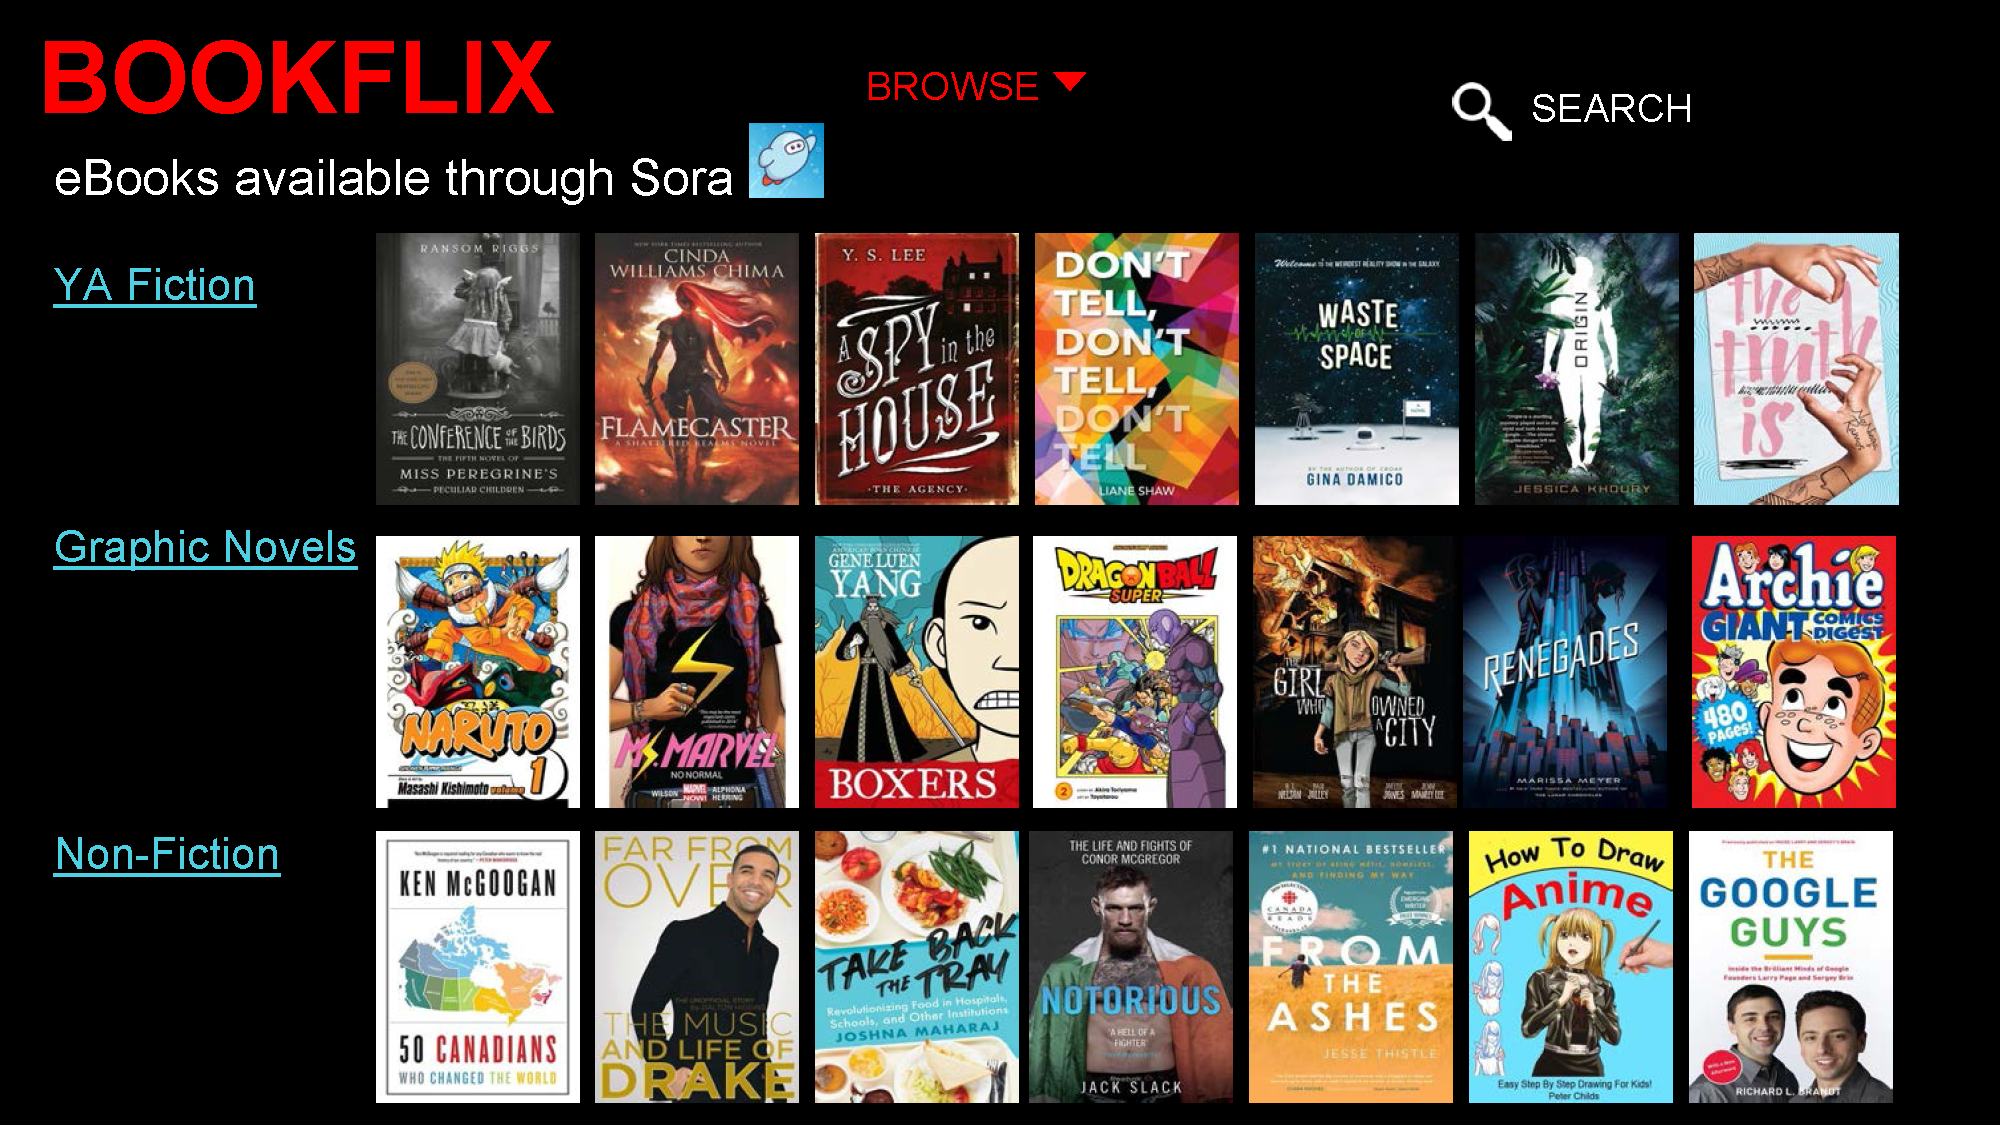 Bookflix Virtual Display - includes links to eBooks on the following topics:  YA Fiction, Graphic Novels & Non-Fiction